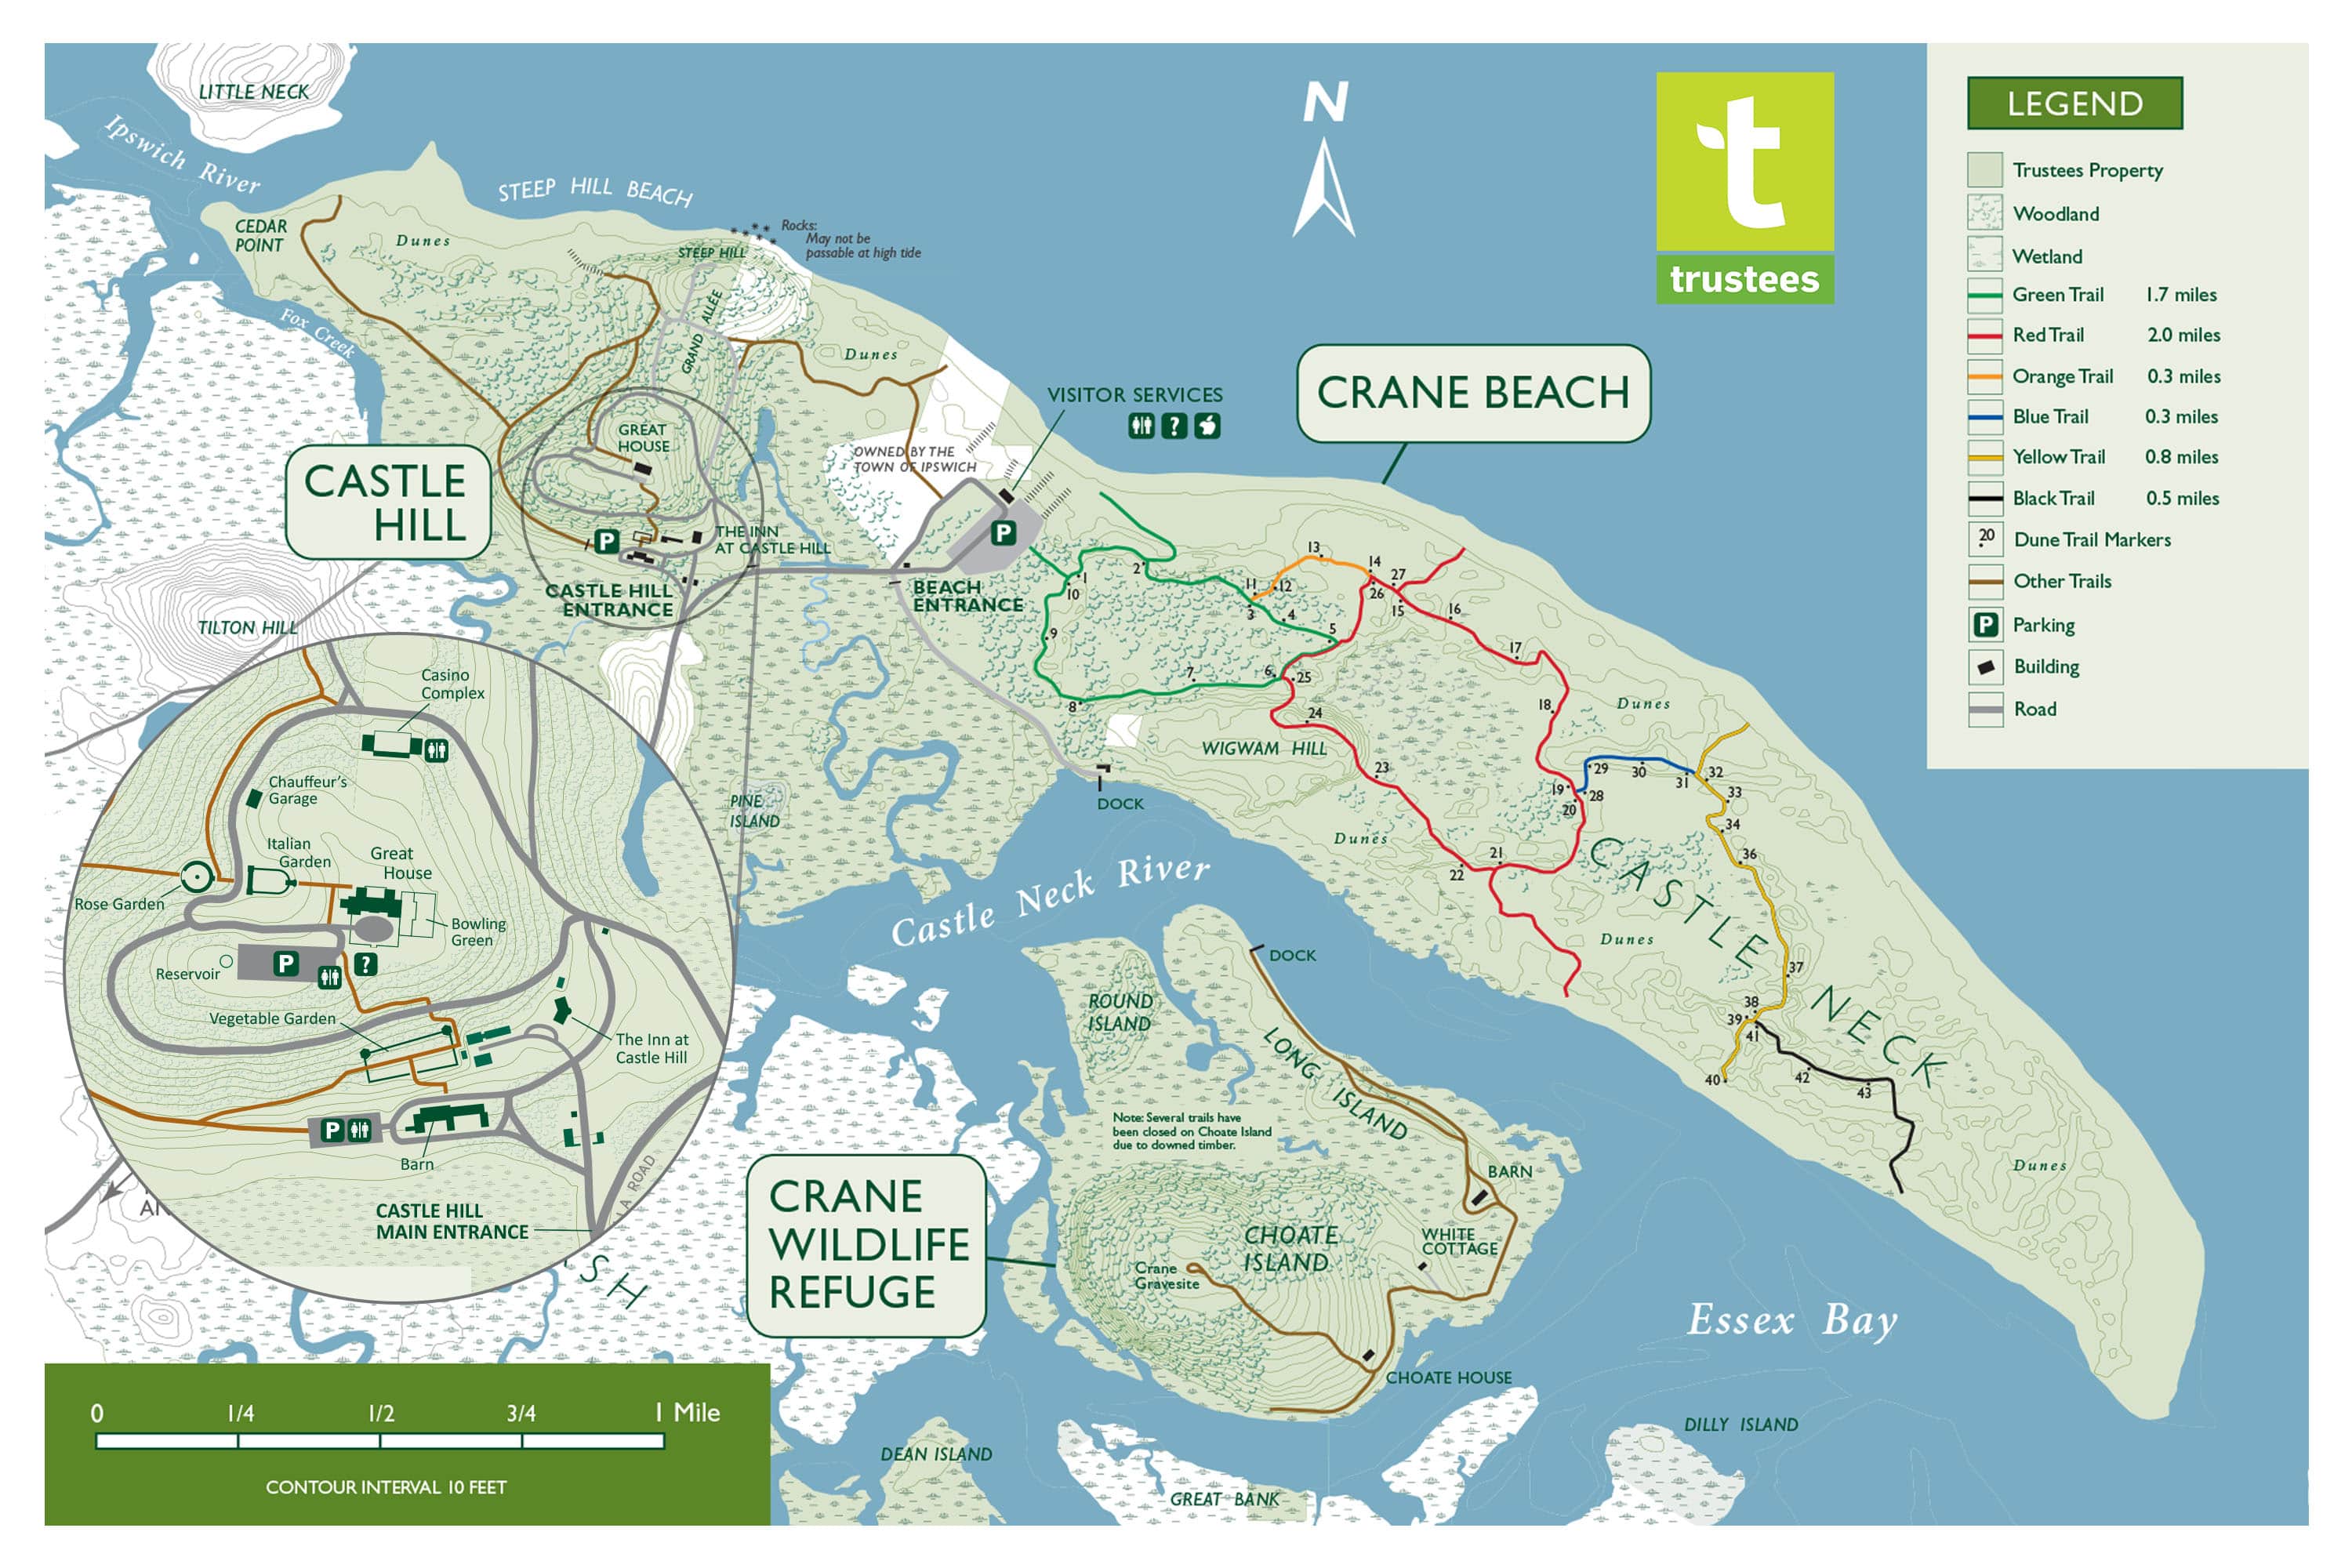 Crane Estate Map with Castle Hill inset map